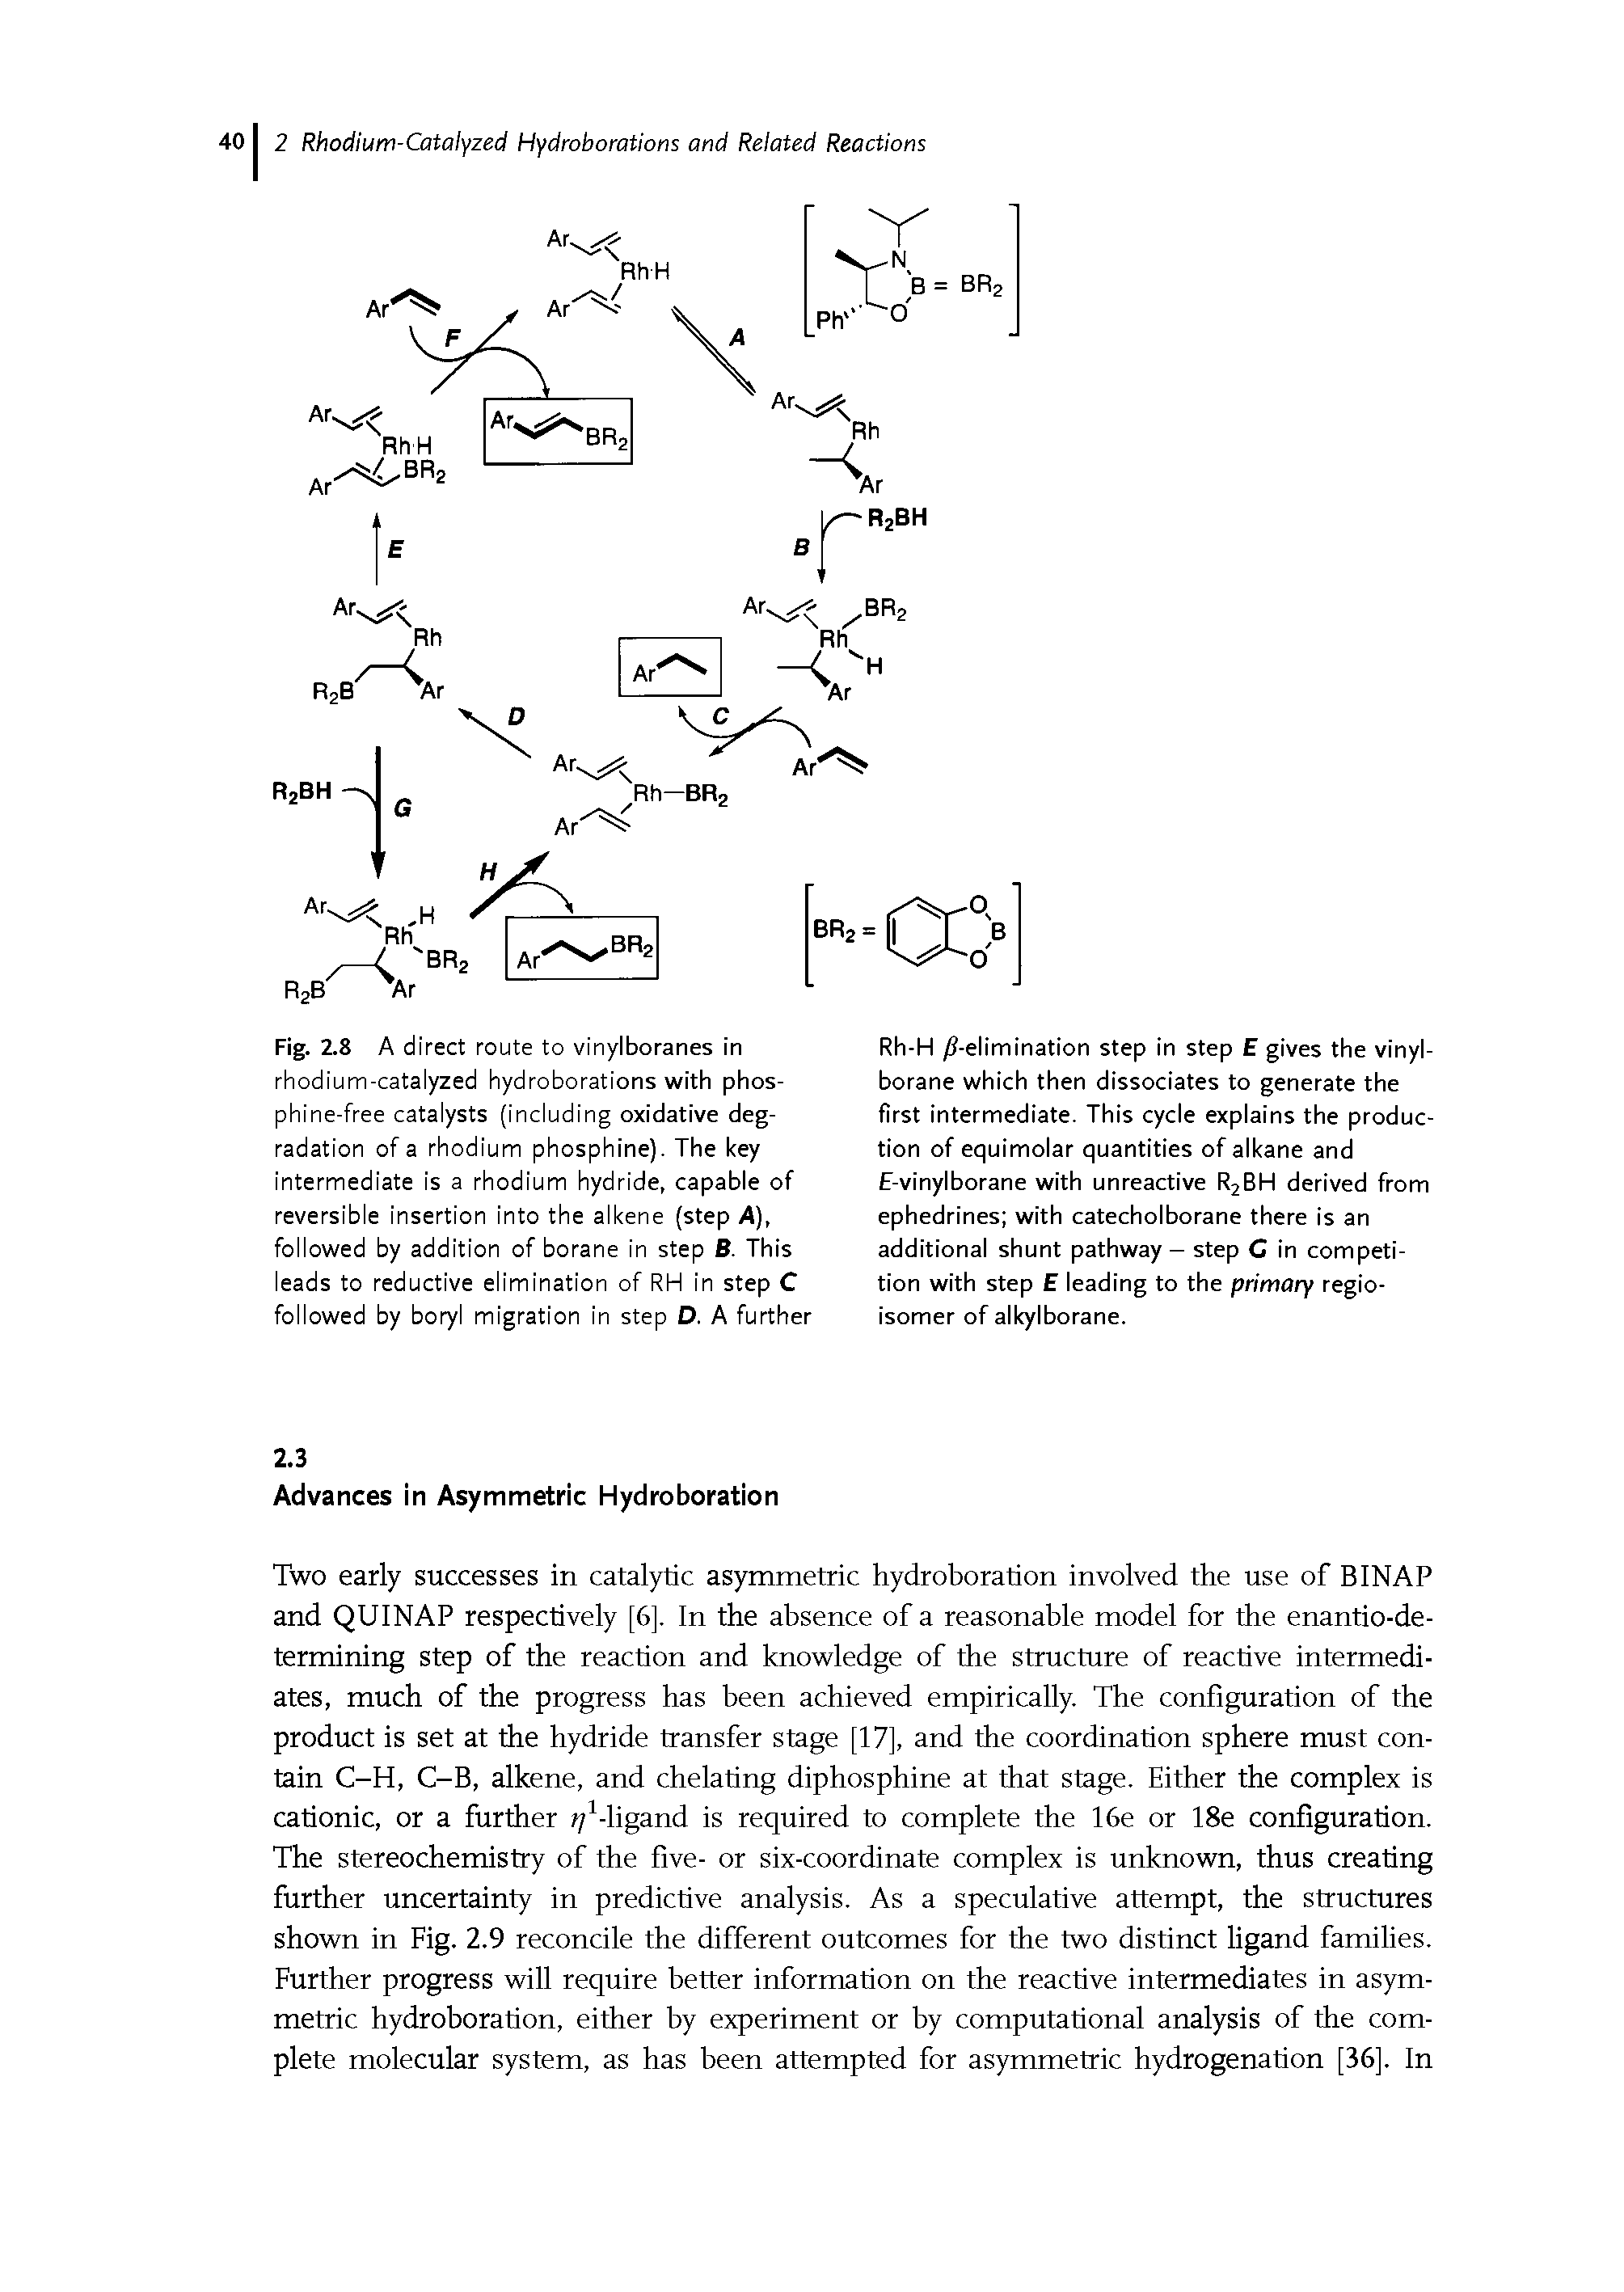 Fig. 2.8 A d irect route to vinylboranes in rhodium-catalyzed hydroborations with phos-phine-free catalysts (including oxidative degradation of a rhodium phosphine). The key intermediate is a rhodium hydride, capable of reversible insertion into the alkene (step A), followed by addition of borane in step B. This leads to reductive elimination of RH in step C followed by boryl migration in step D. A further...